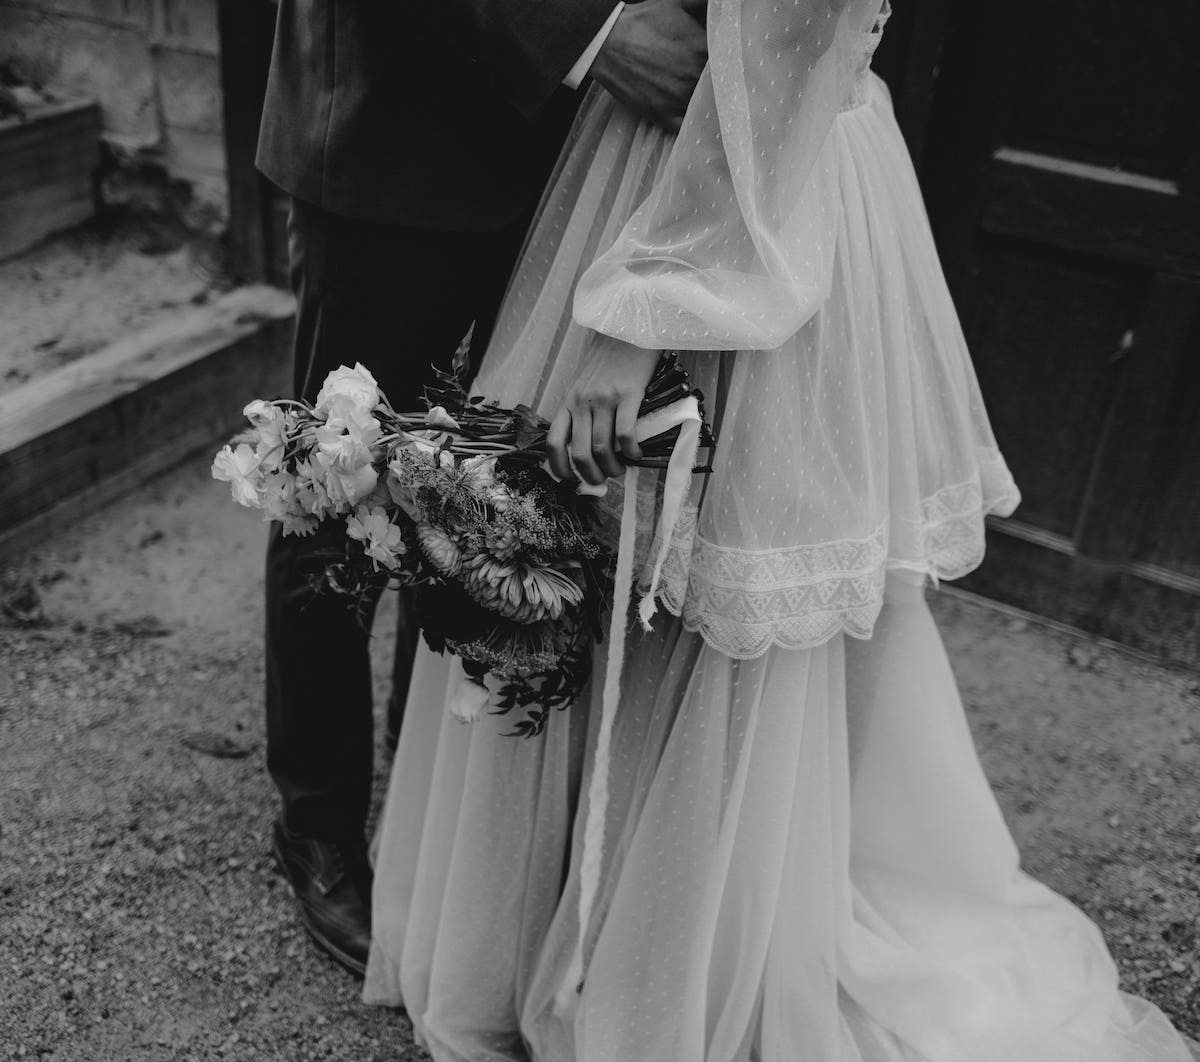 Find your wedding photographer